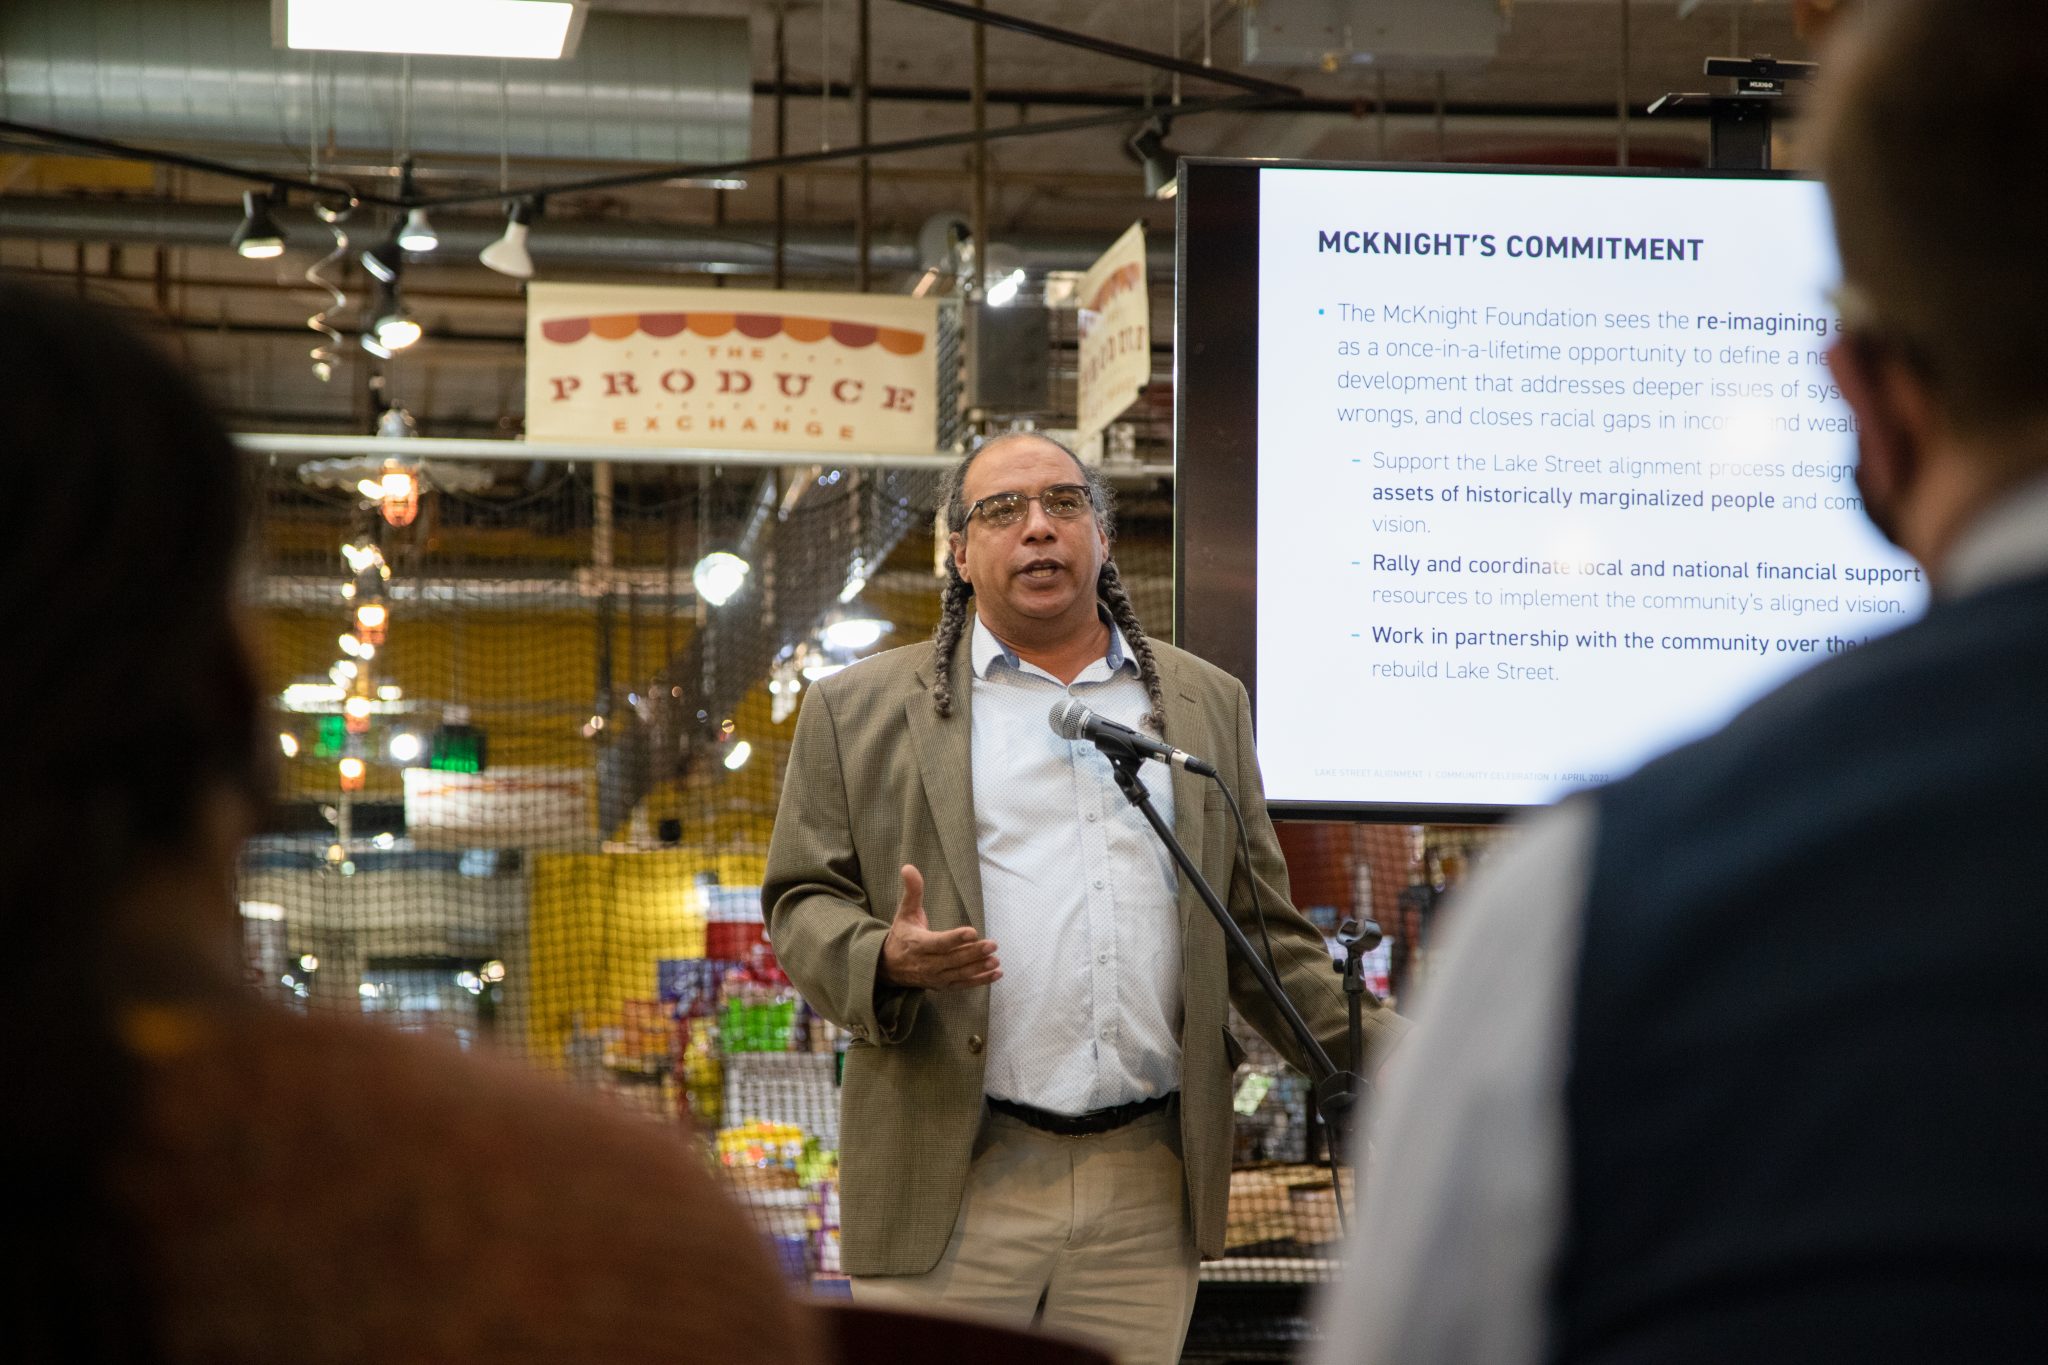 At a community gathering inside Midtown Global Market, David Nicholson shares McKnight's commitment to community in equitably rebuilding Lake Street, the epicenter of the civil unrest in Minneapolis that followed the murder of George Floyd.